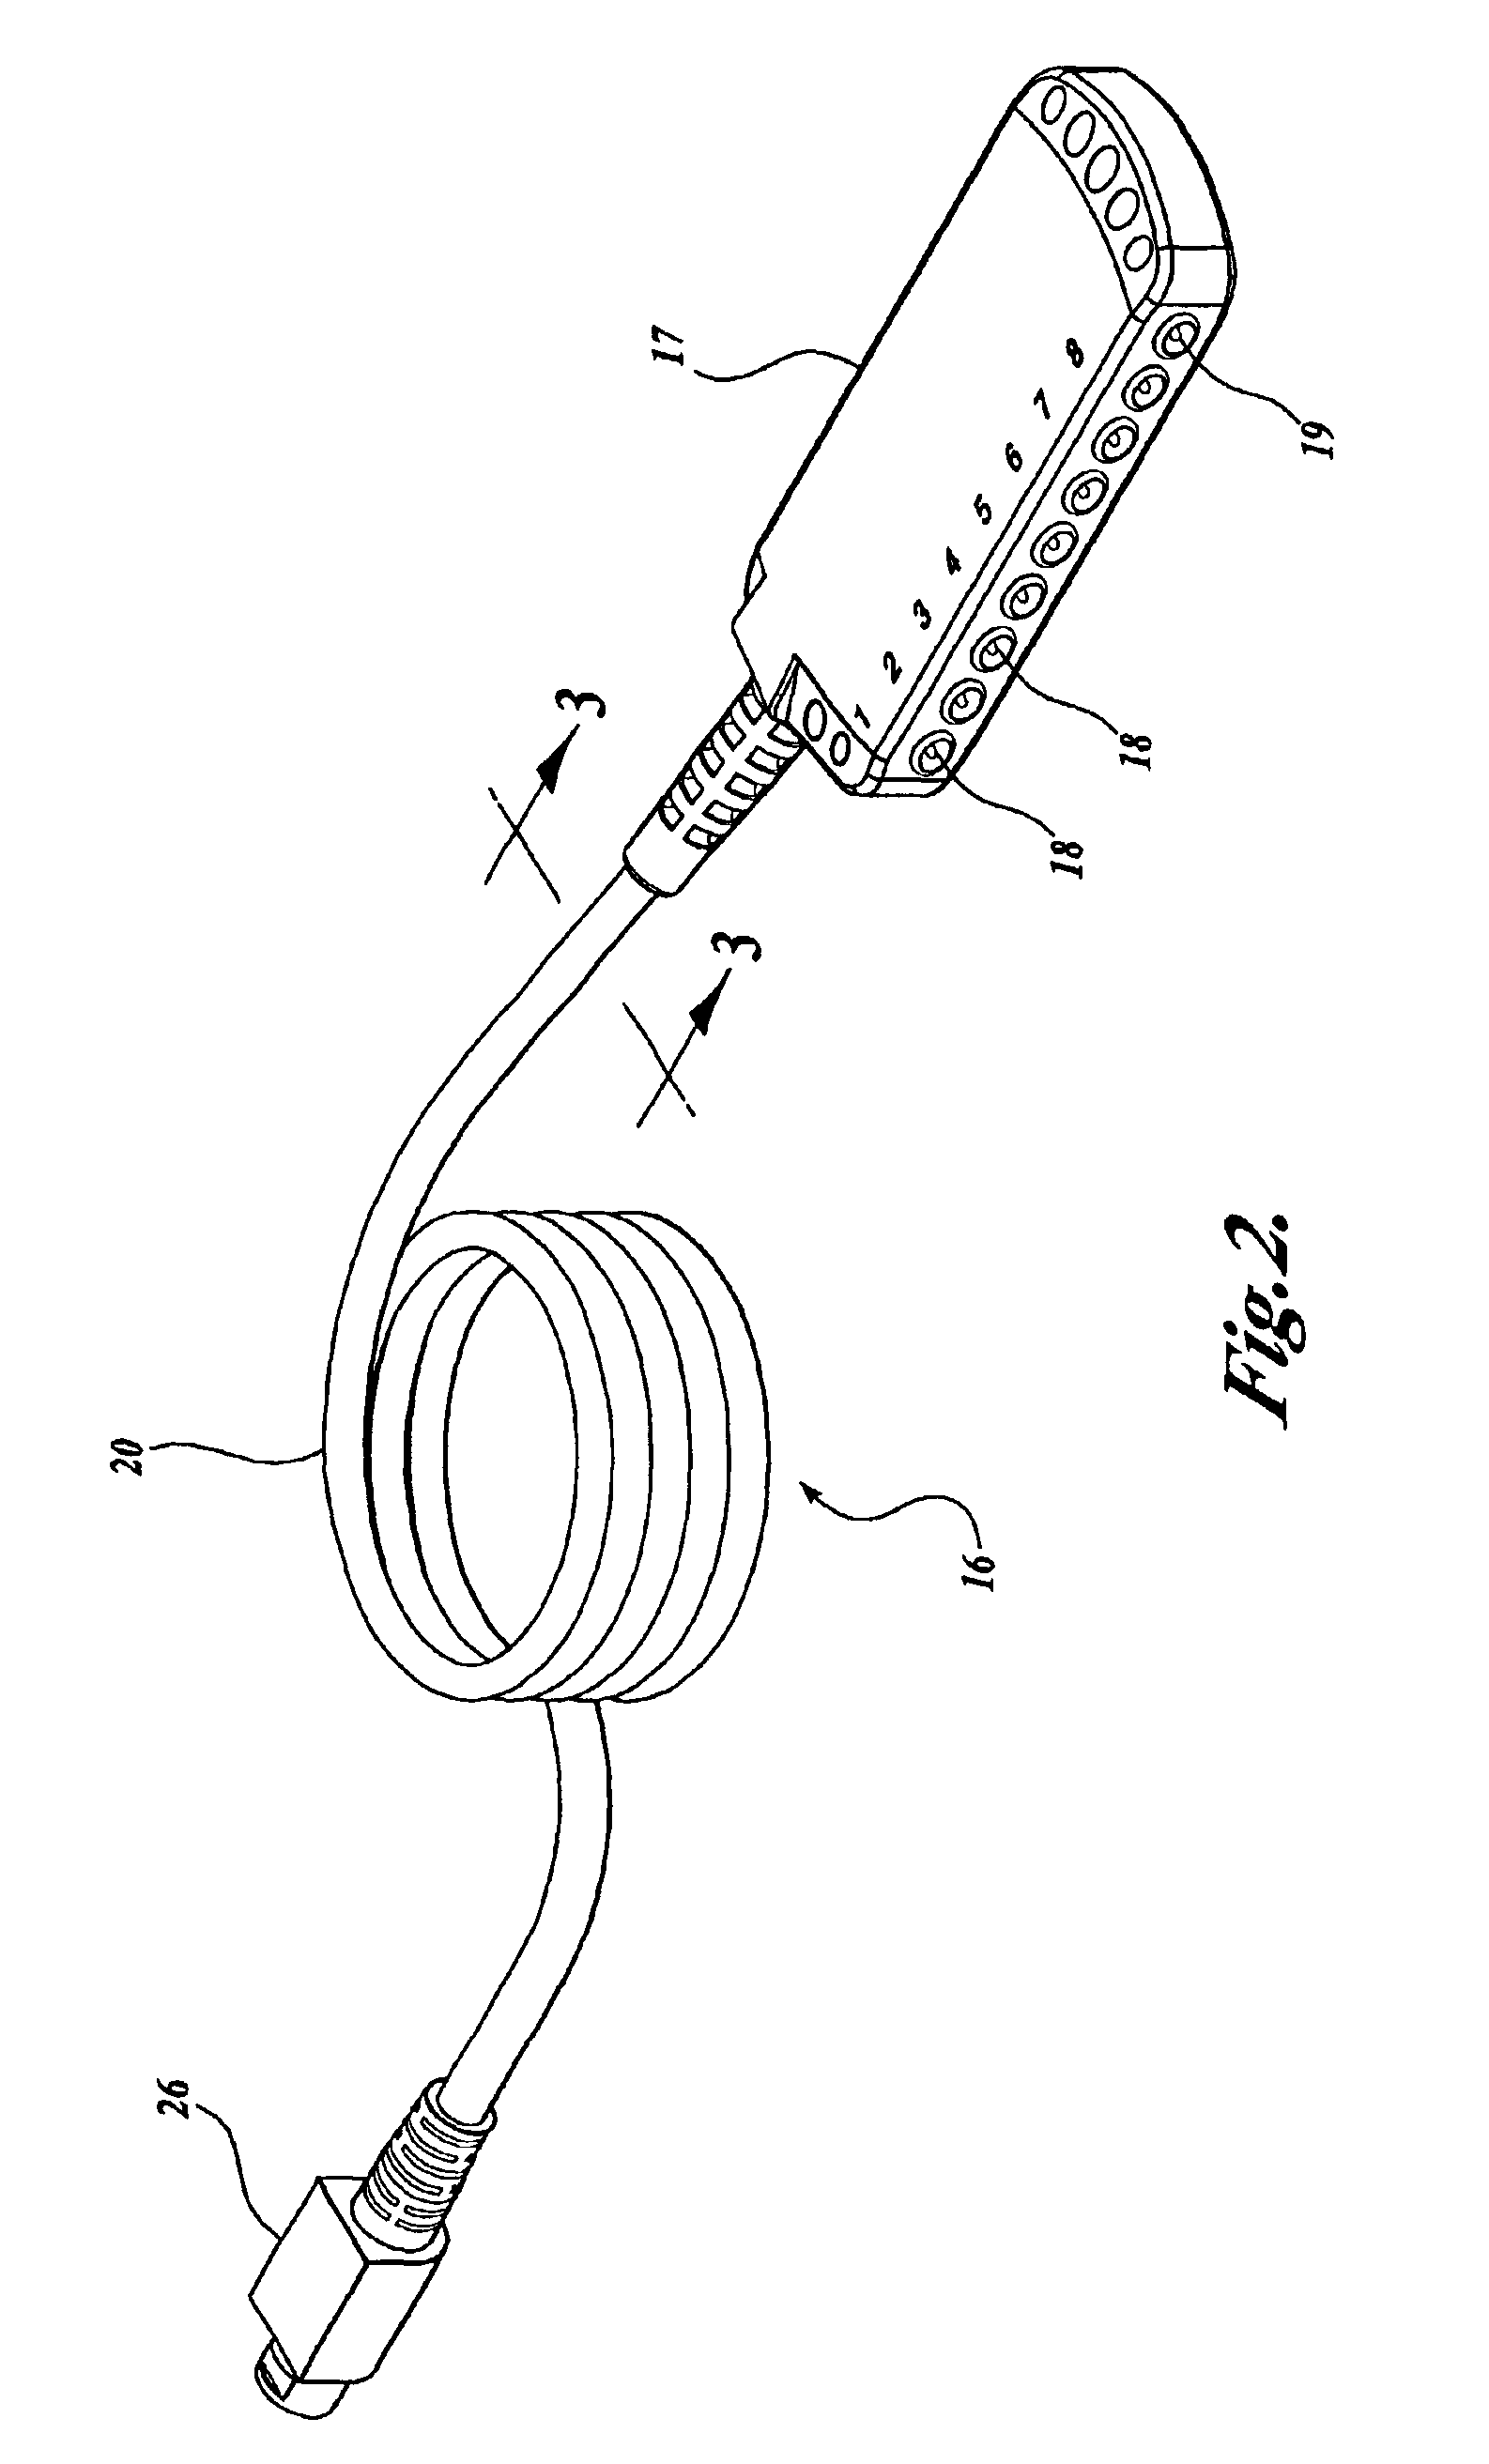 System and device for reducing signal interference in patient monitoring systems